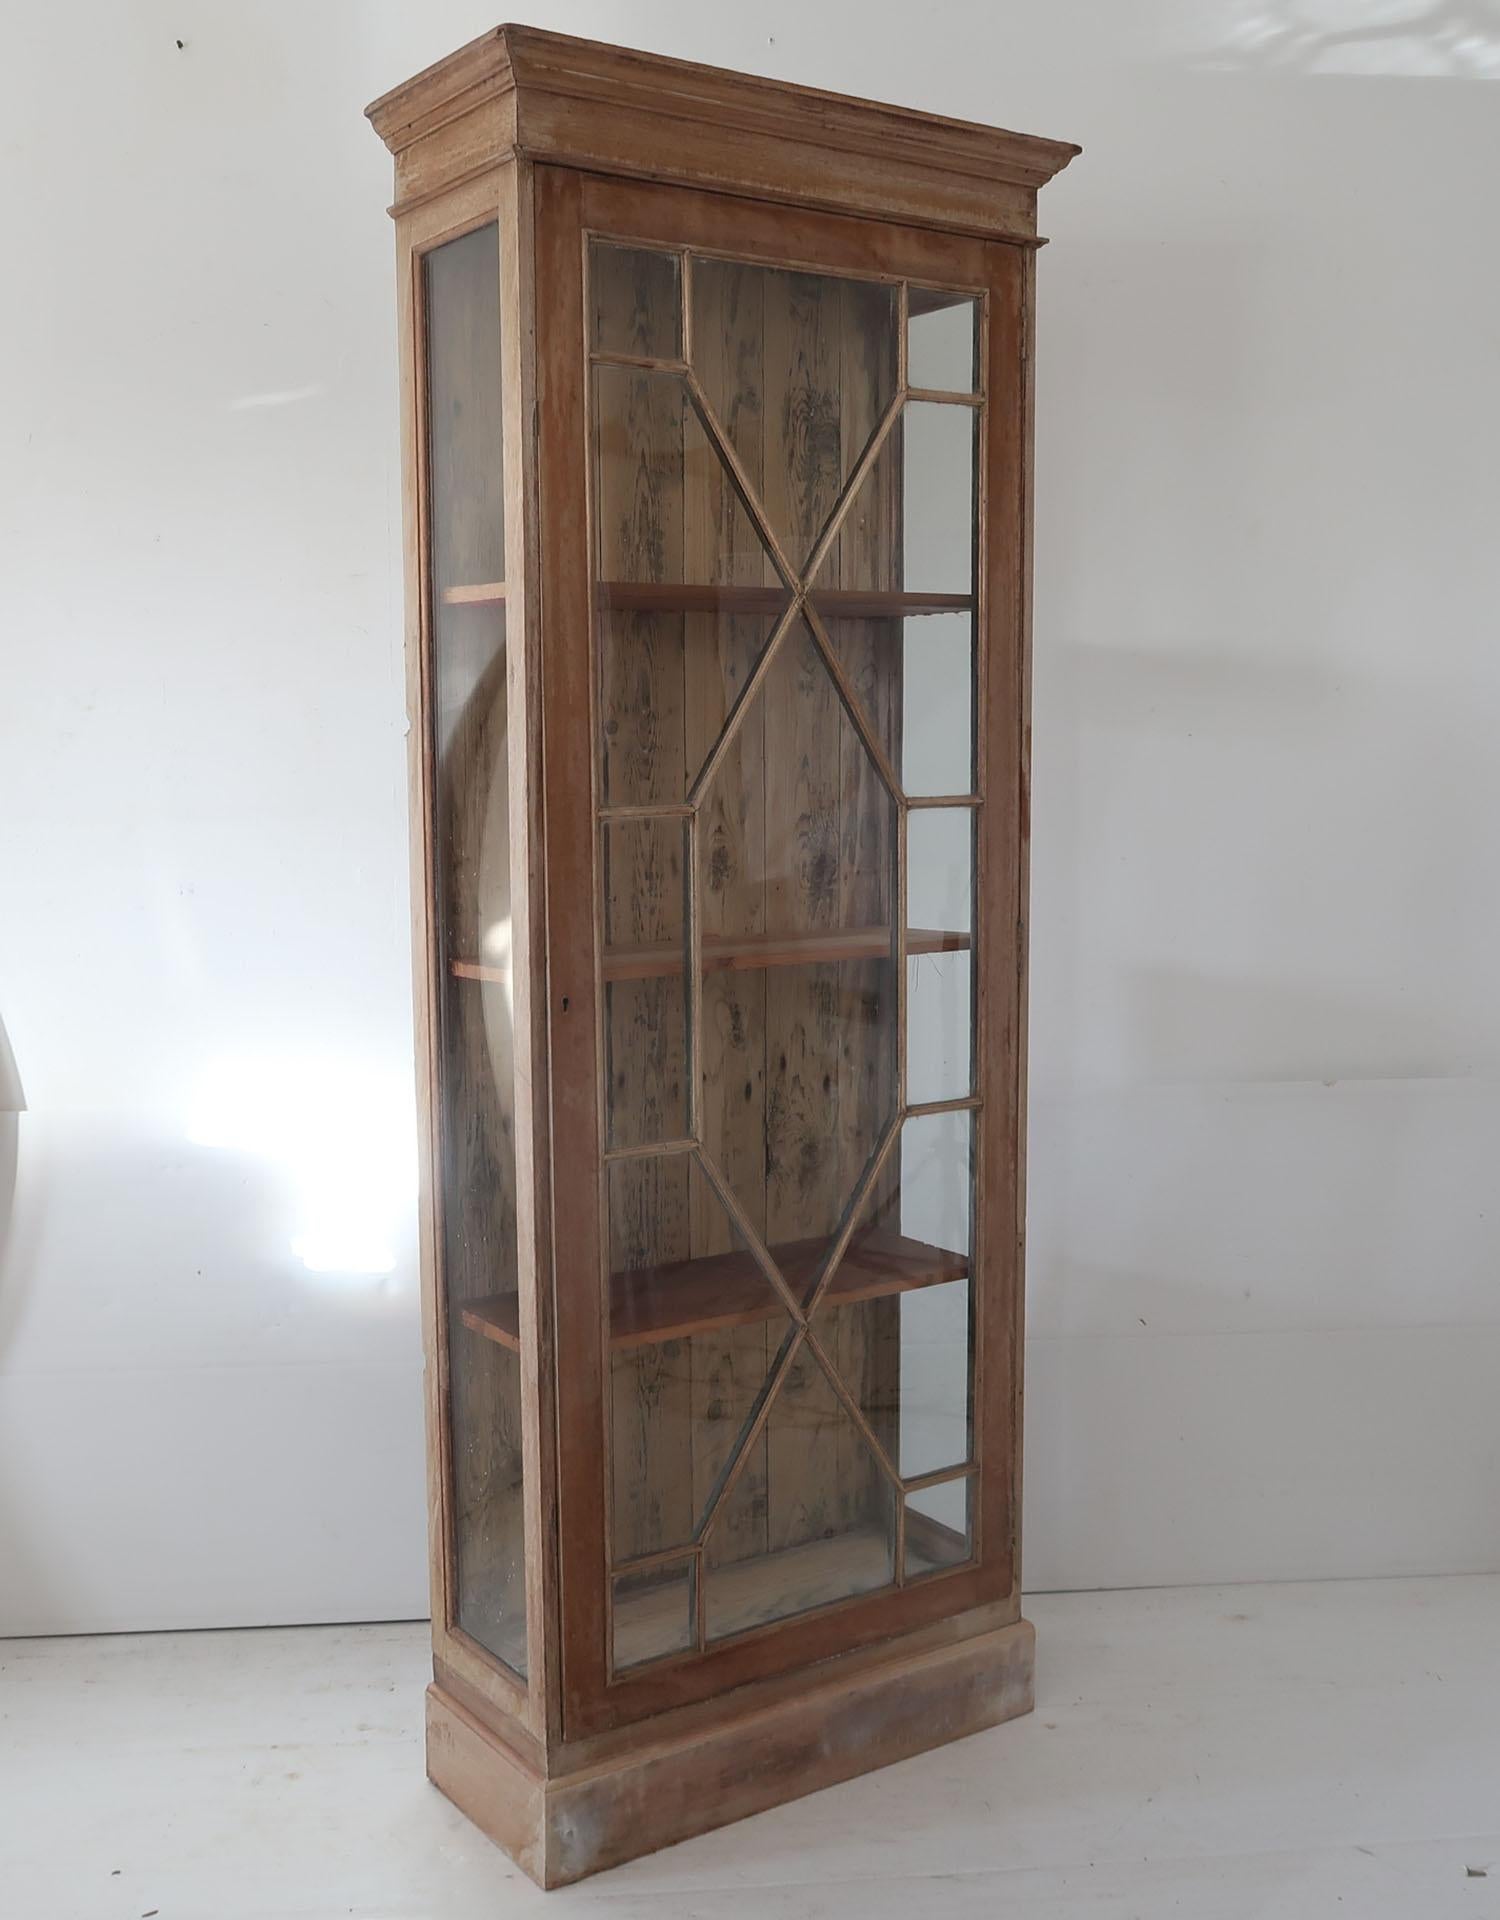 Fabulous small tropical hardwood* and pine cabinet

I particularly like the simplicity of this piece and the original bubbly glass in the door and sides.

The measurement given is the cornice size.

It has a key.

*Because the timber is antique